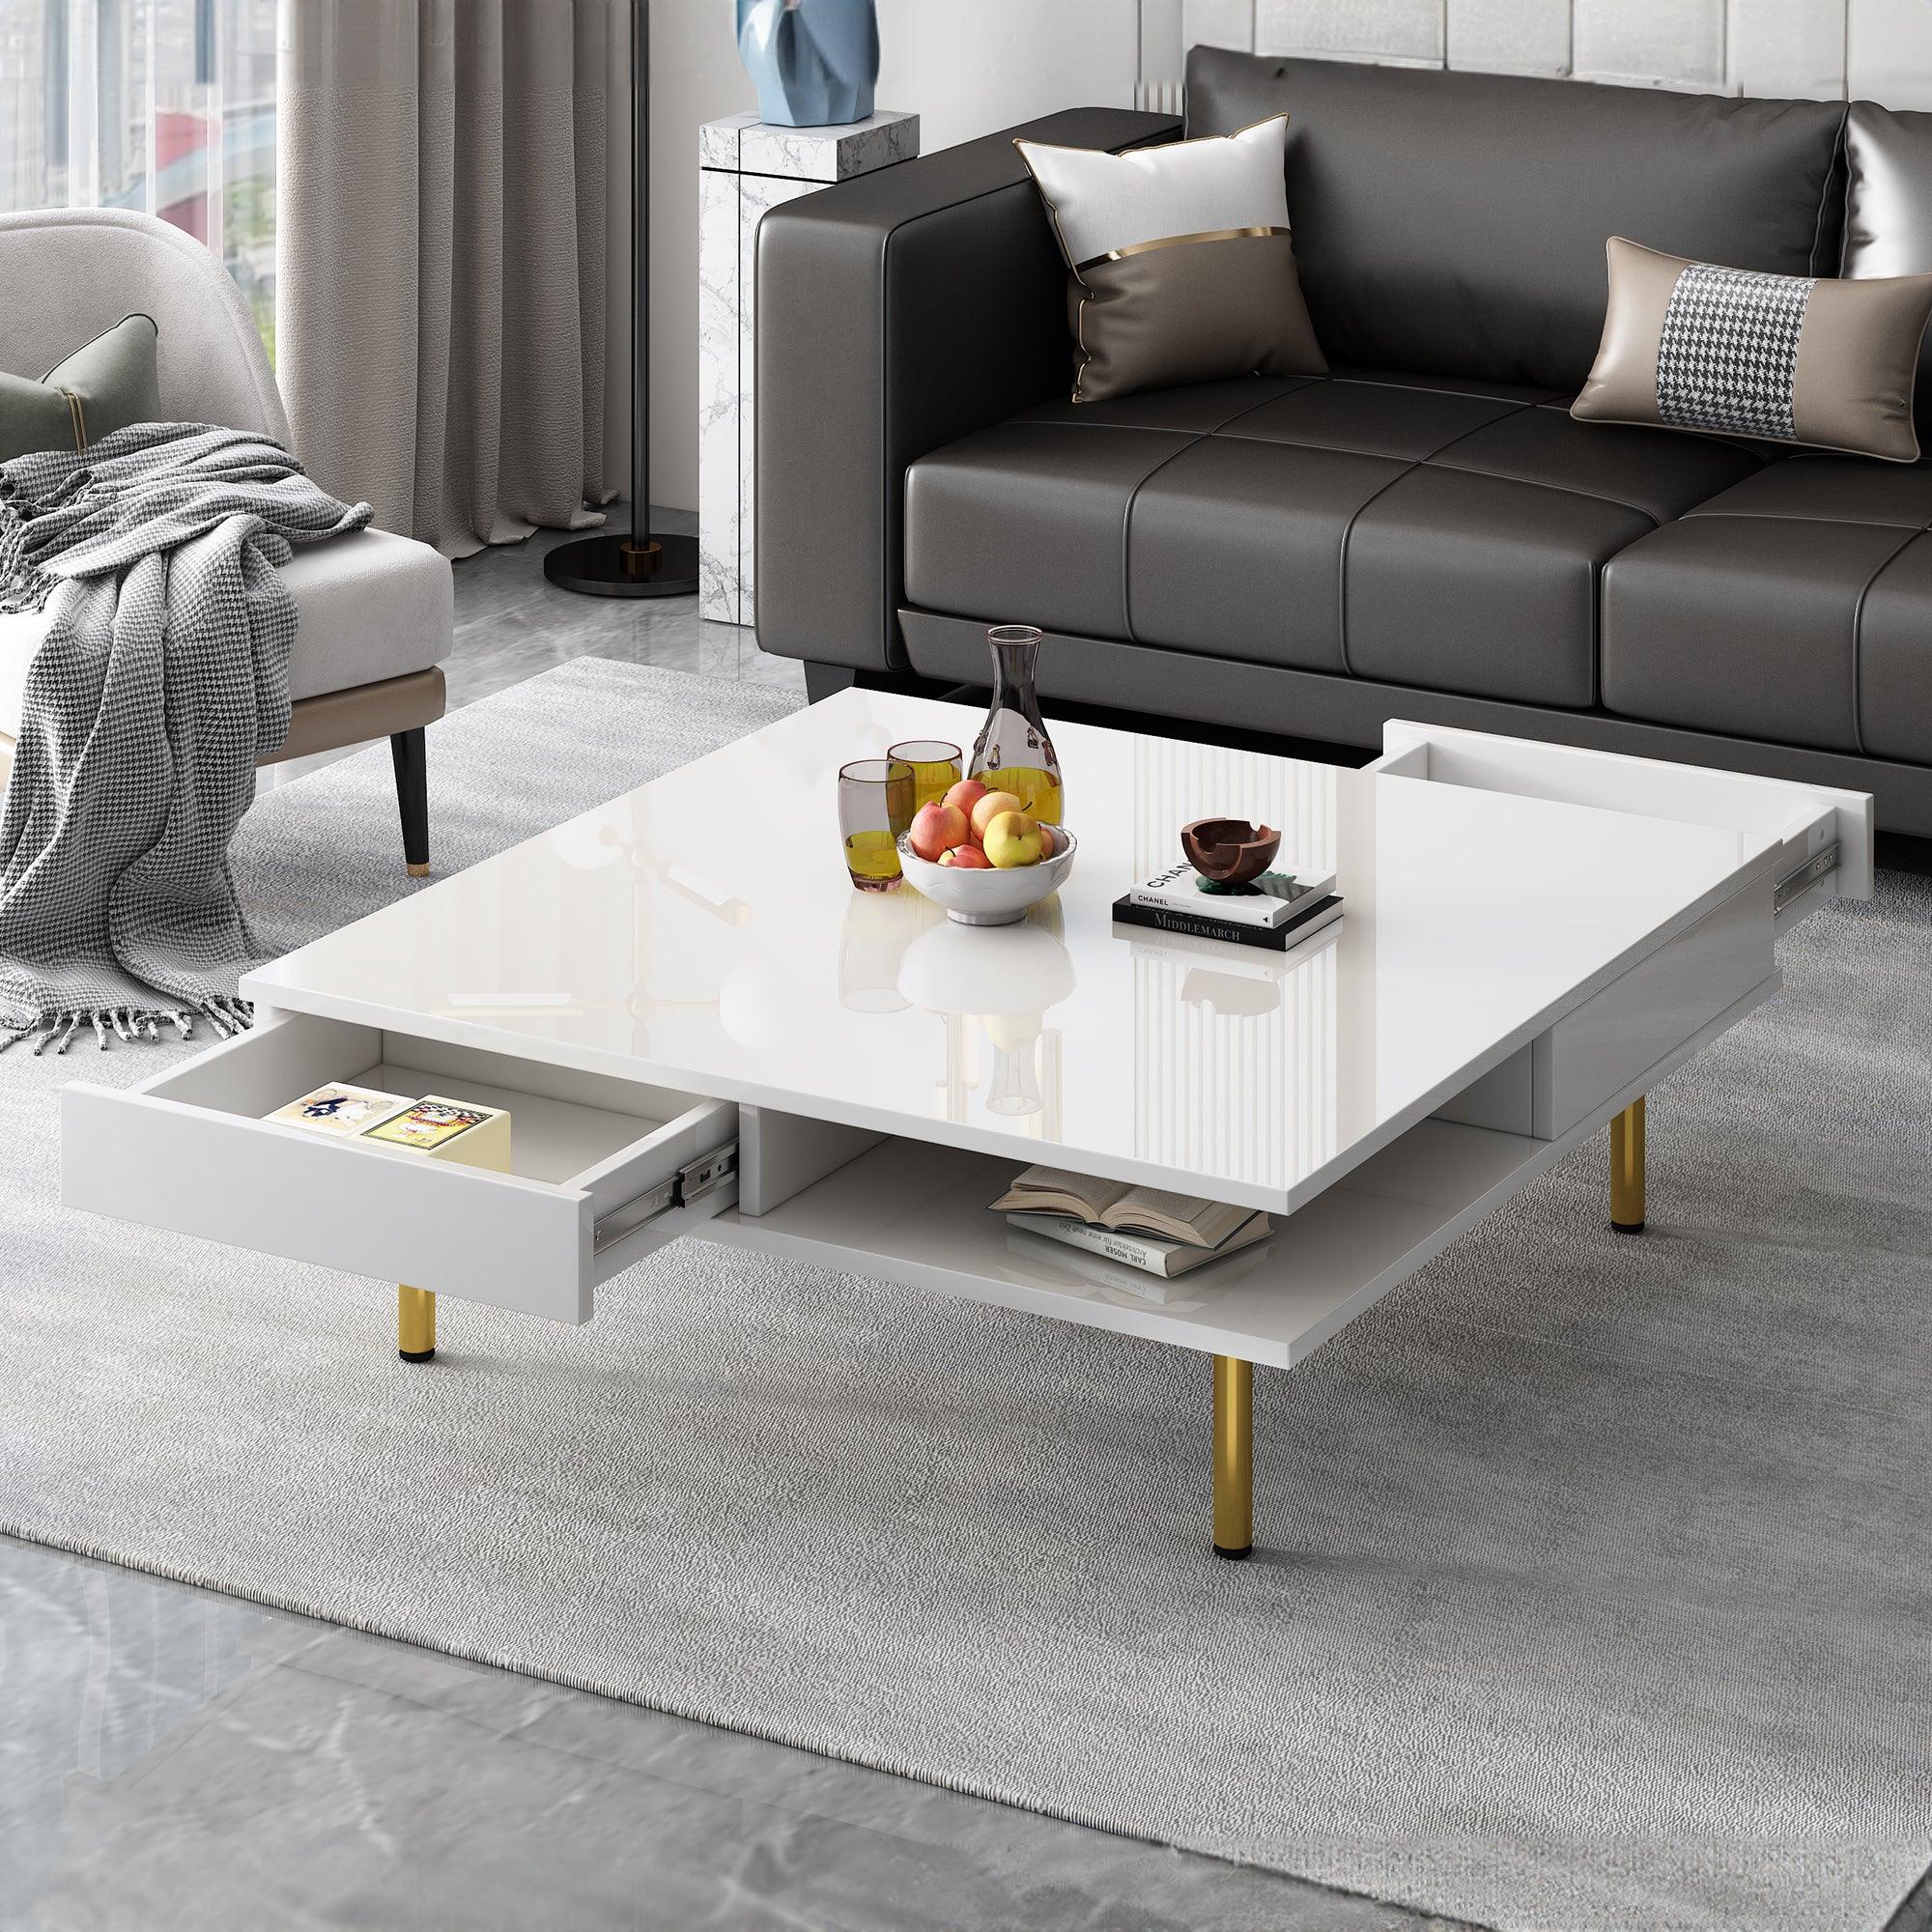 🆓🚛 Exquisite High Gloss Coffee Table With 4 Golden Legs & 2 Small Drawers, 2-Tier Square Center Table for Living Room, White